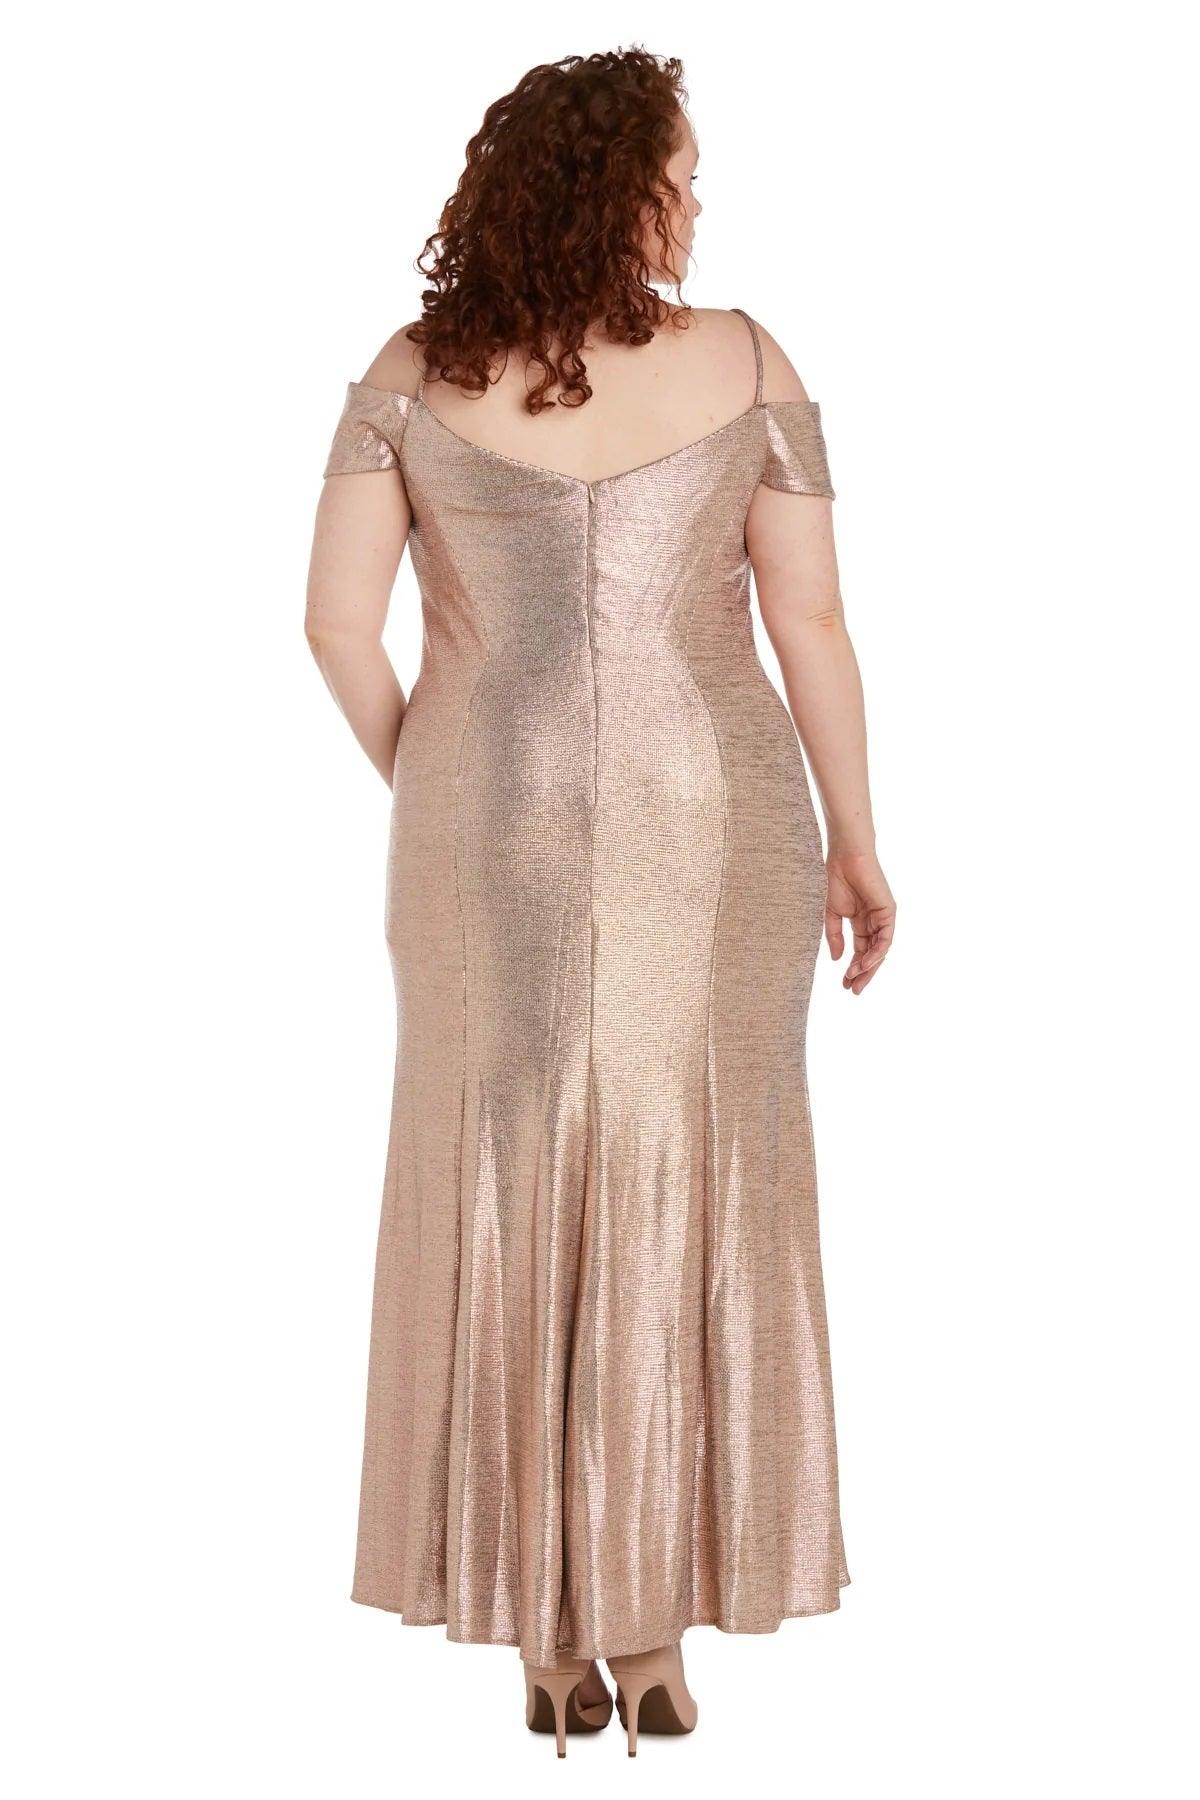 Nightway Long Formal Plus Size Dress 21761W - The Dress Outlet